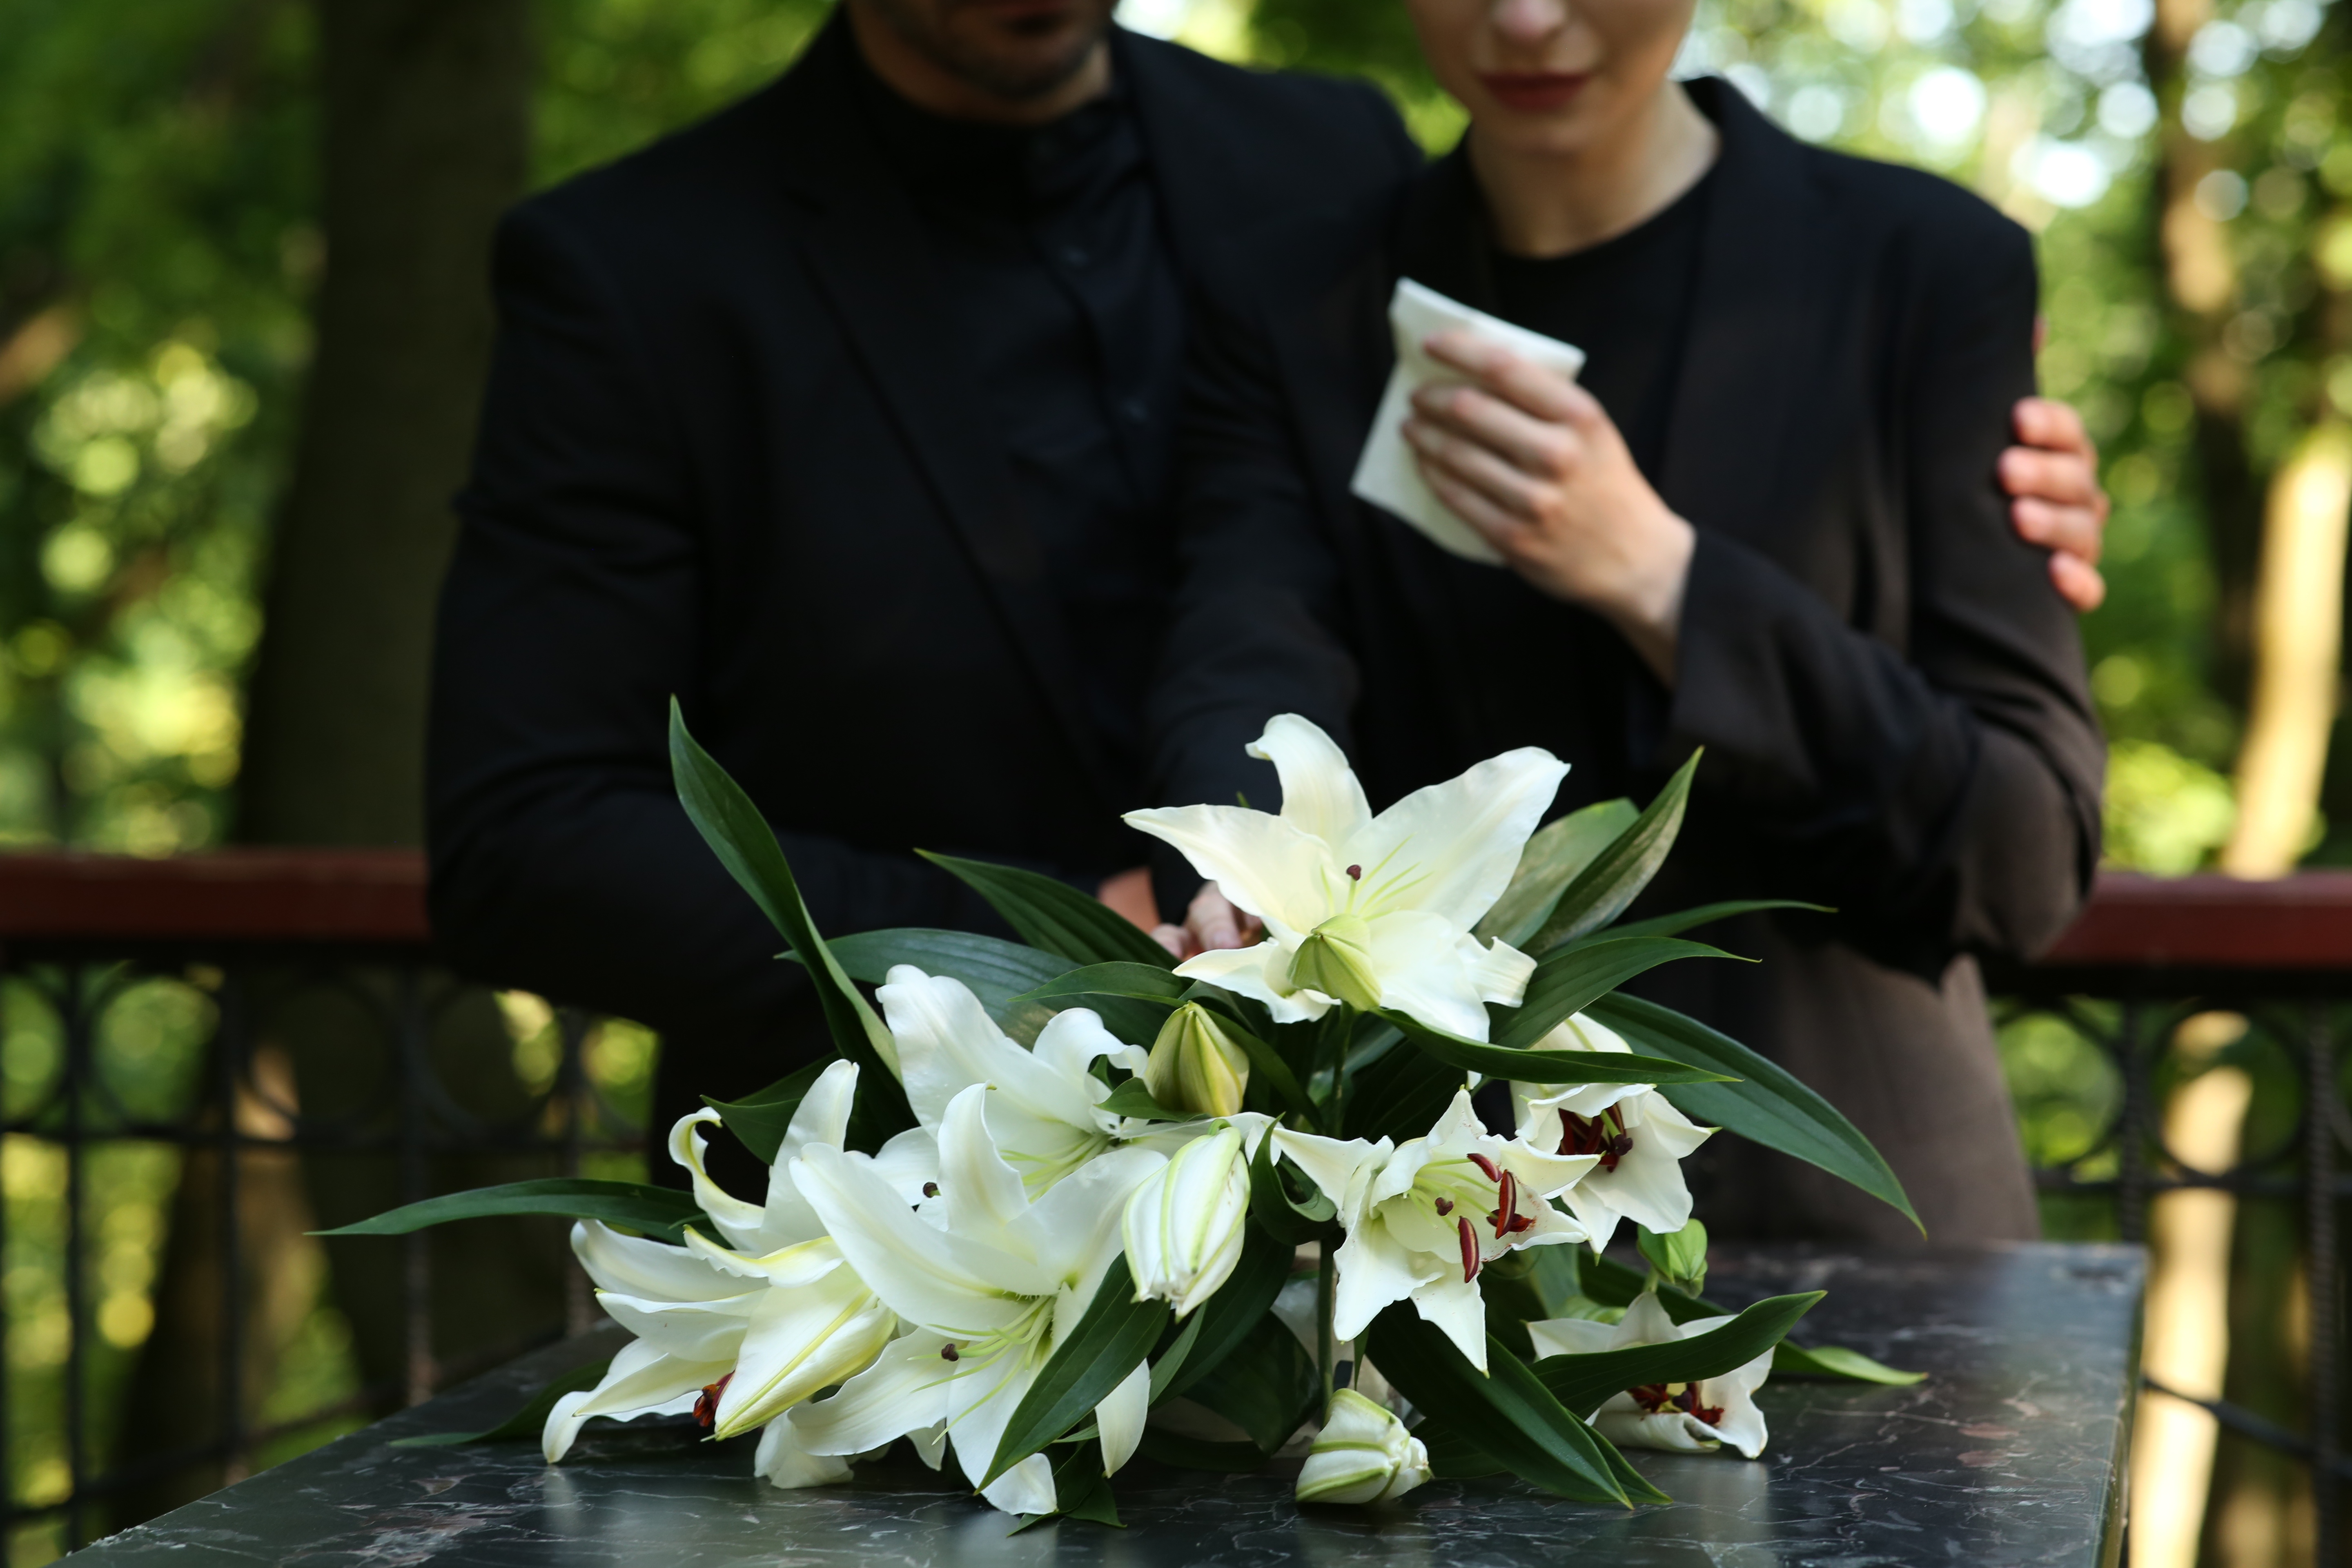 Couple near granite tombstone with white lilies at cemetery outdoors, selective focus. Funeral ceremony | Source: Getty Images